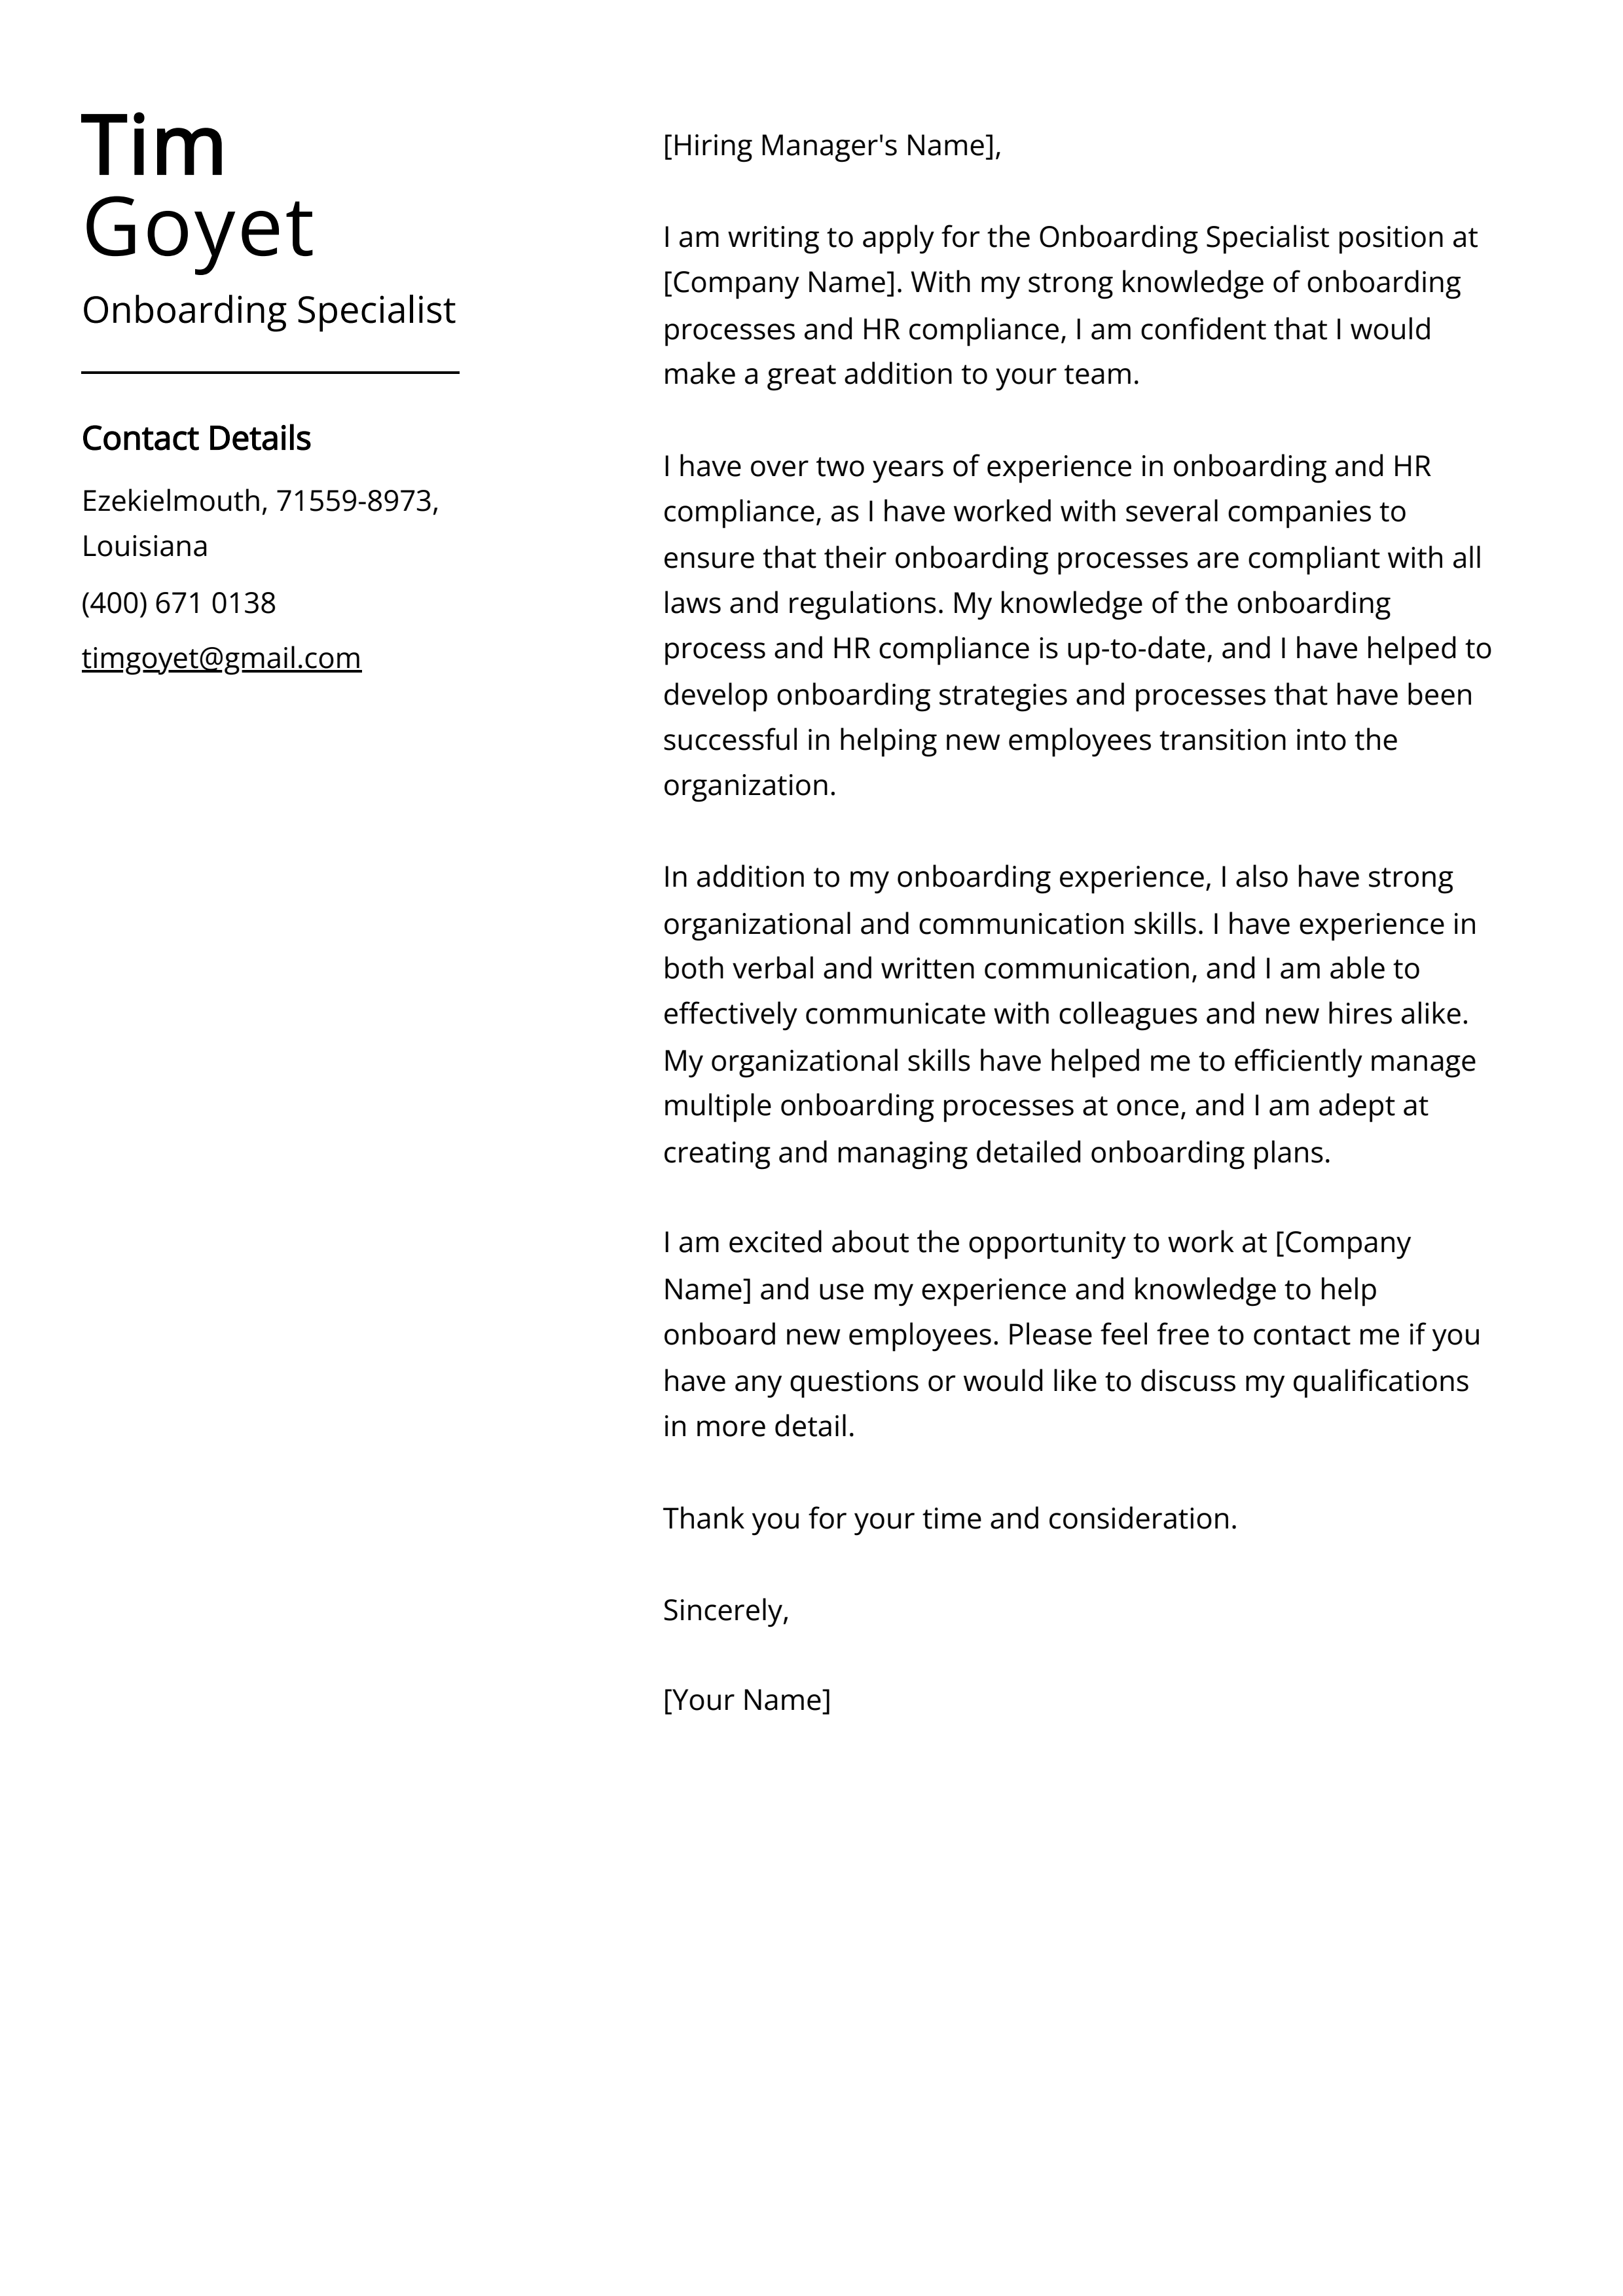 Onboarding Specialist Cover Letter Example